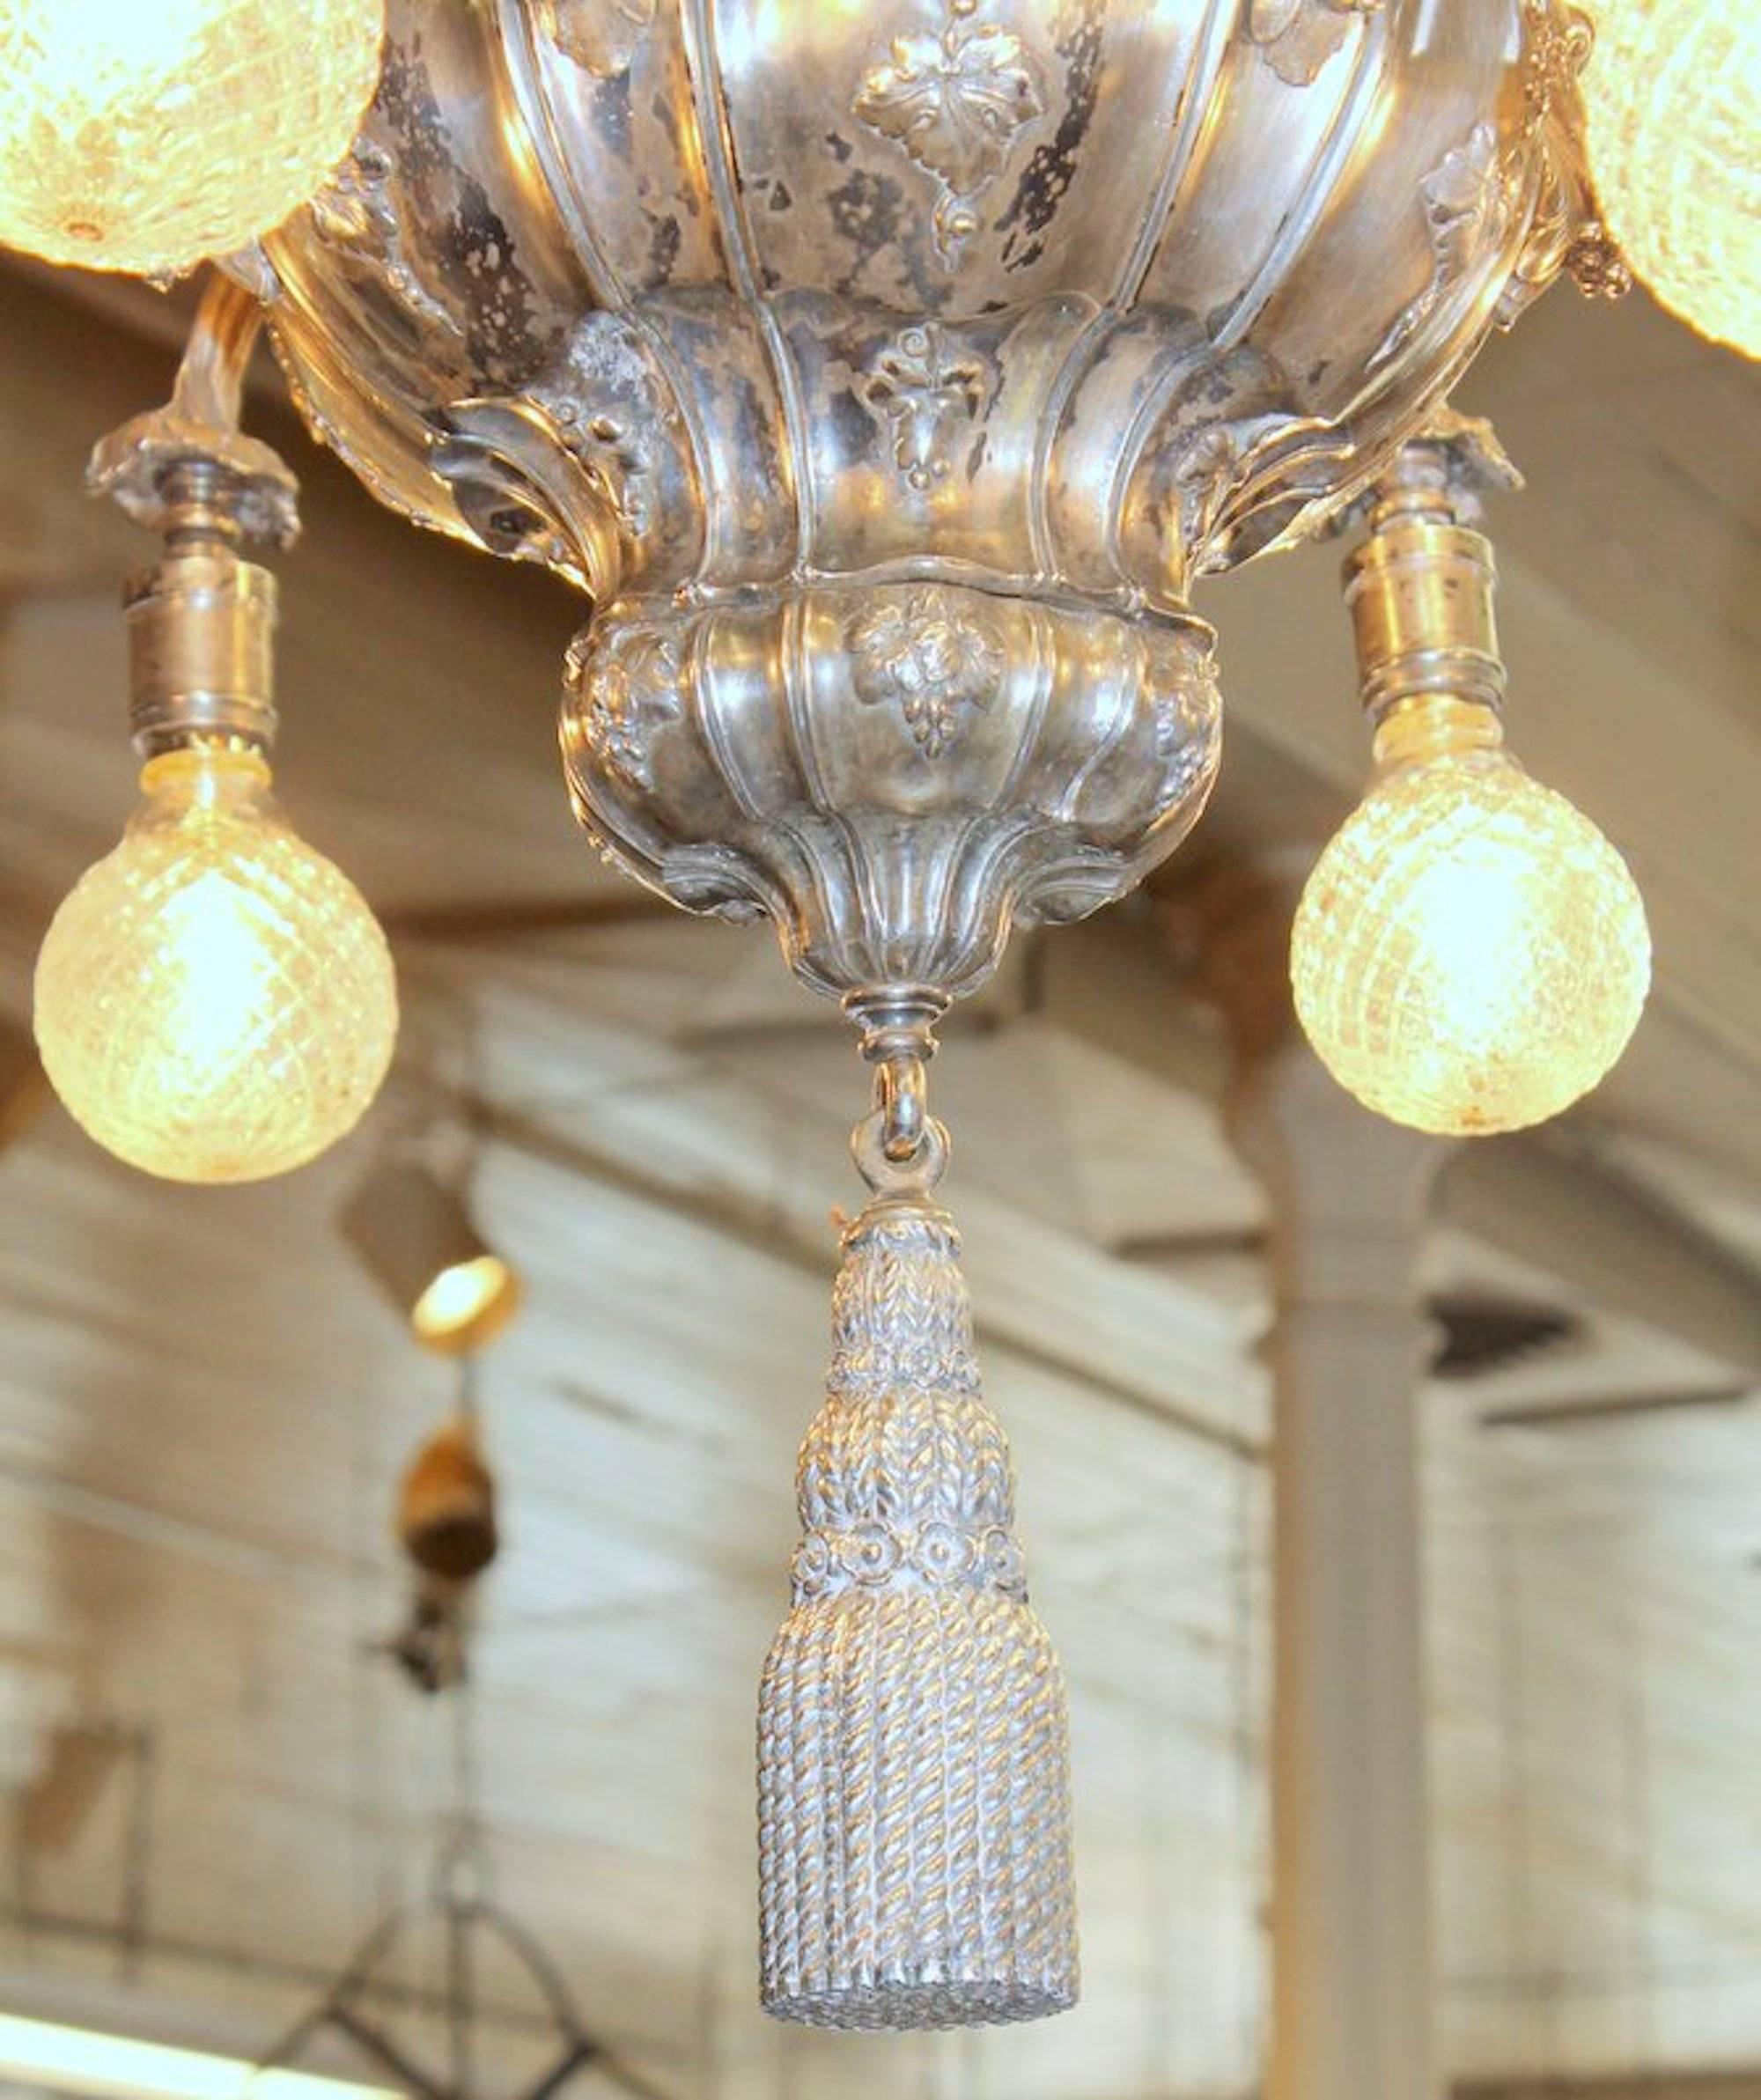 Very fine and rare antique American E. F. Caldwell & Co. Silver plated bronze nine-light, two tier pear shape, grape motif chandelier with cast tassel and original canopy and chain

Edward F Caldwell & Co. was a premier designer and manufacturer